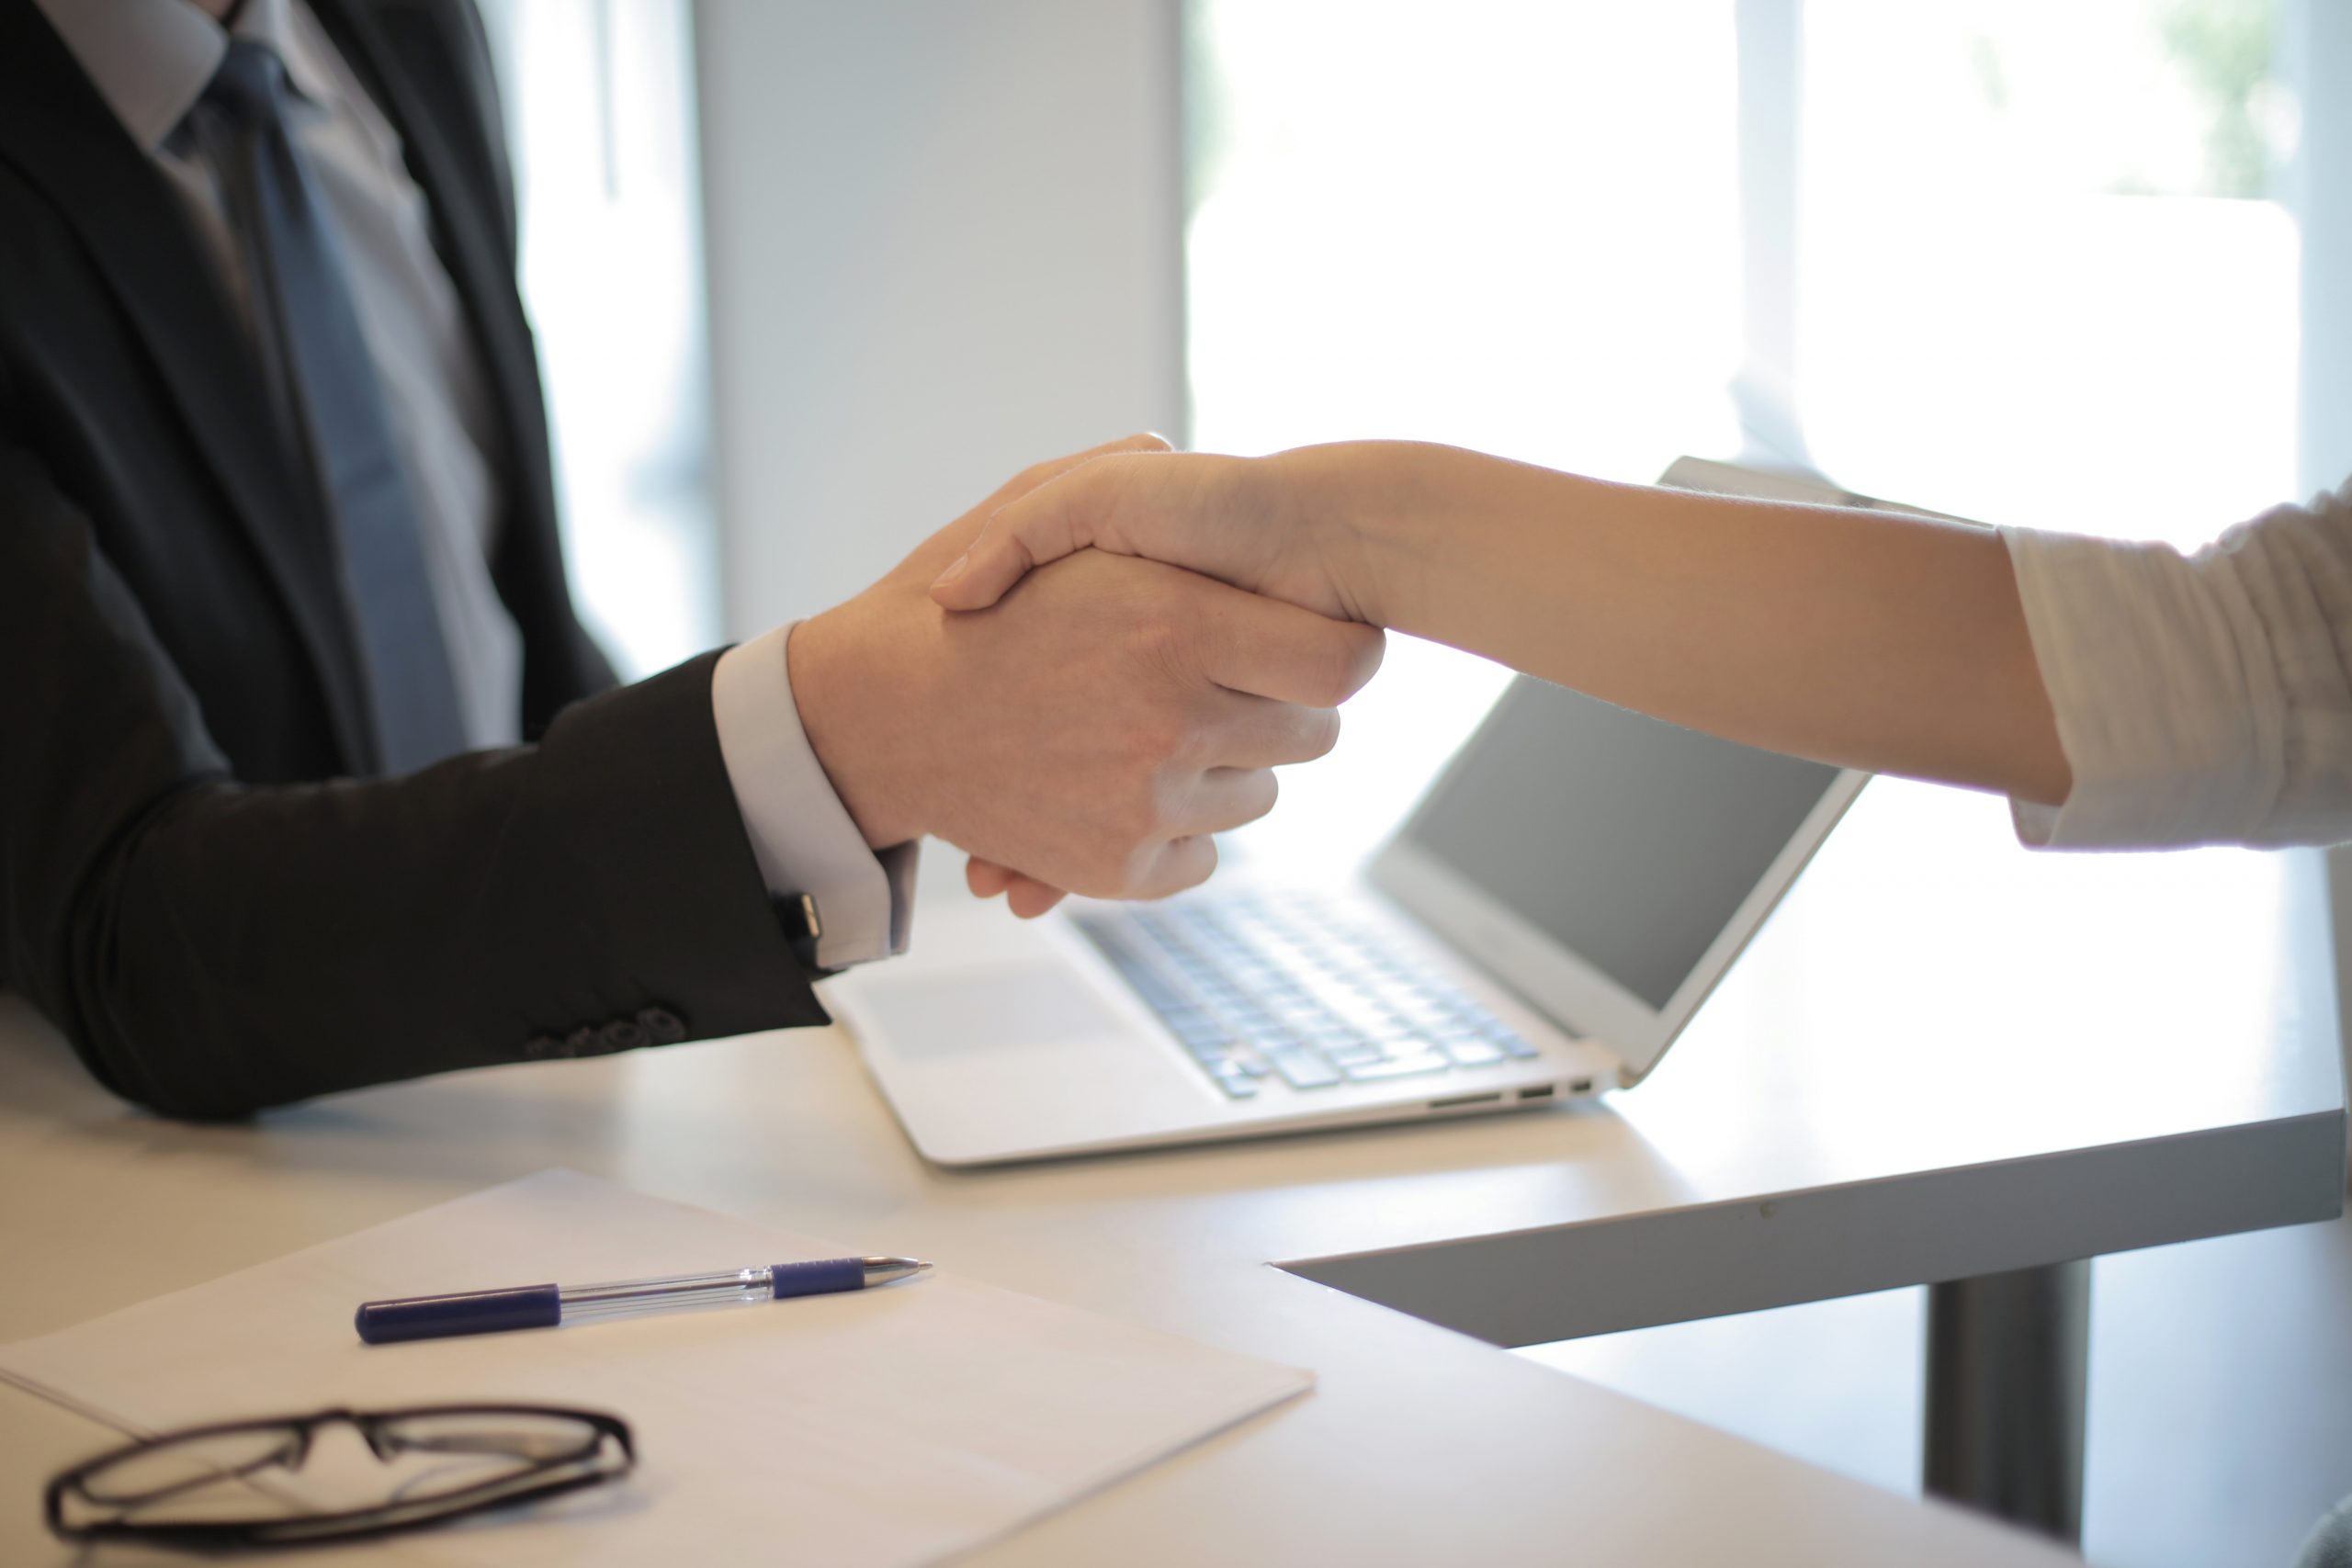 Handshake in Business Setting to Hire New Employee Suggesting Need for Employment Contract